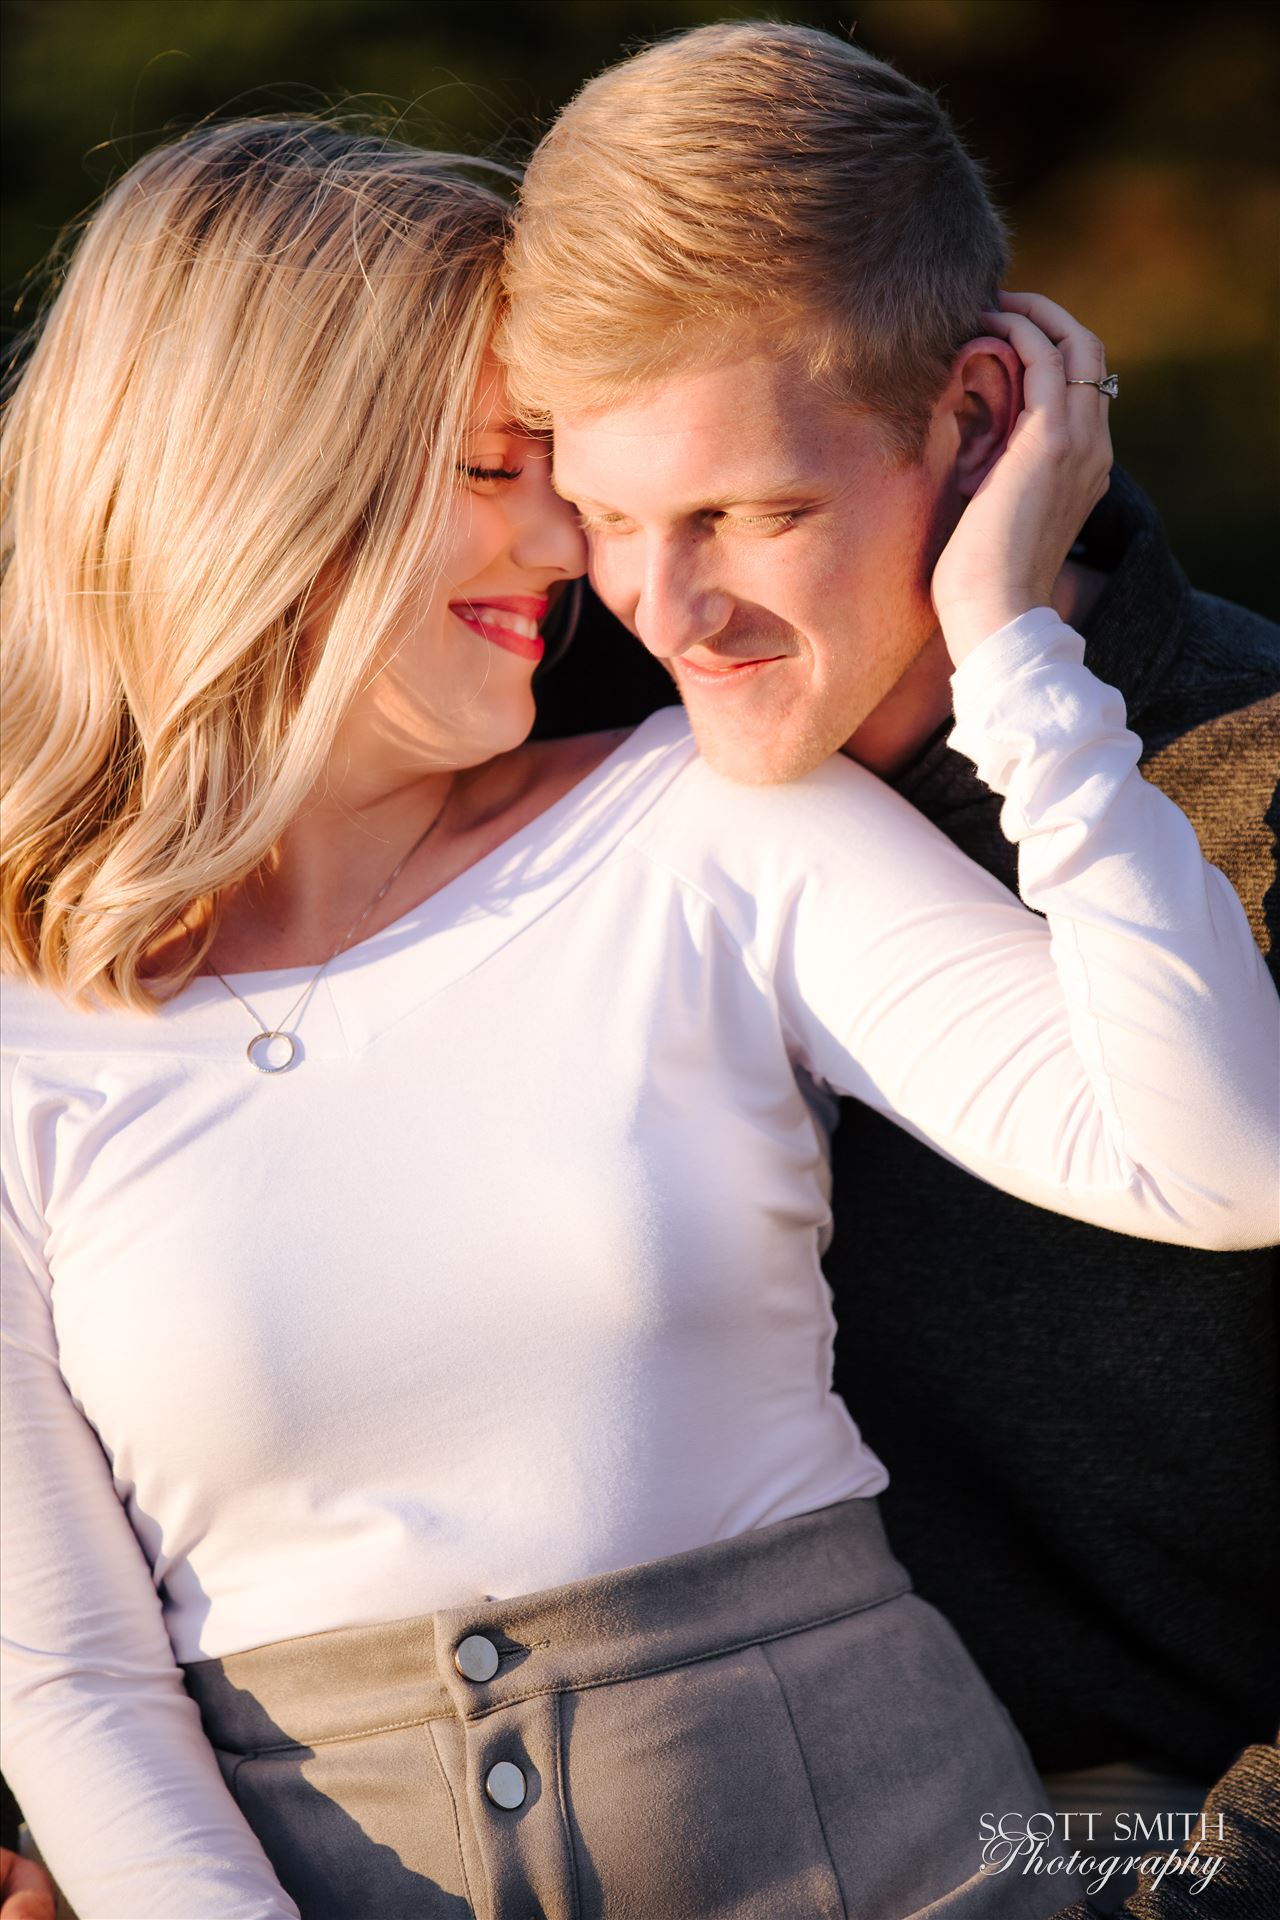 Joanna and Ryan 1 - Joanna and Ryan's engagement session at Spooner's Cover, California. by Scott Smith Photos